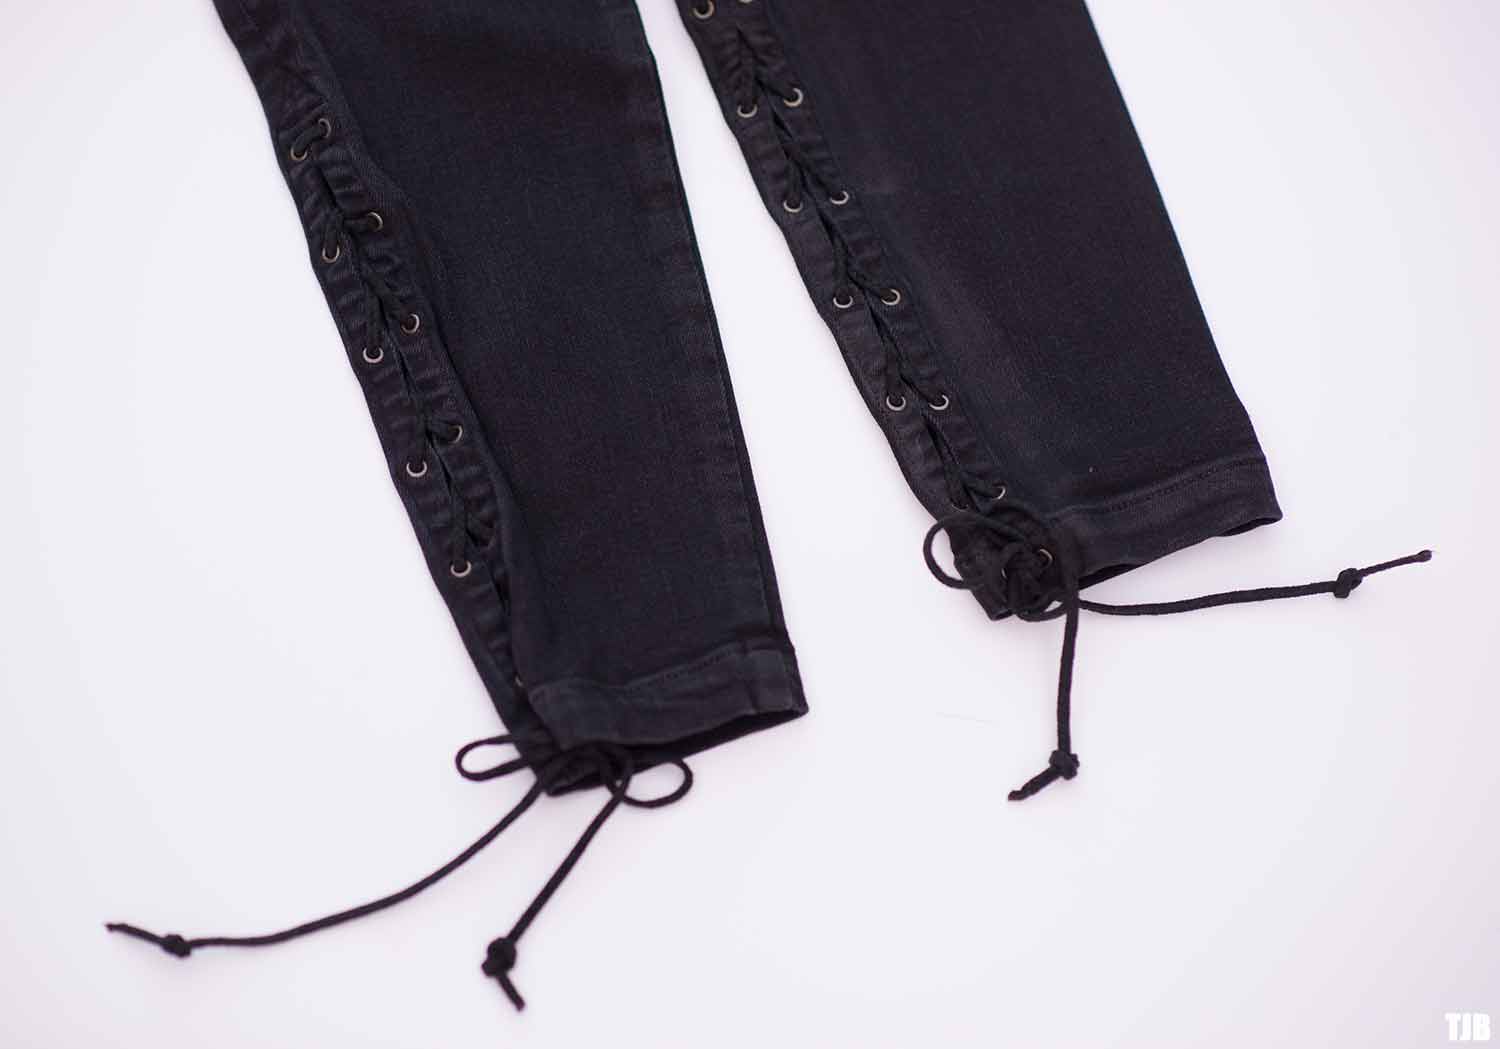 hudson-nix-skinny-lace-up-jeans-review-8